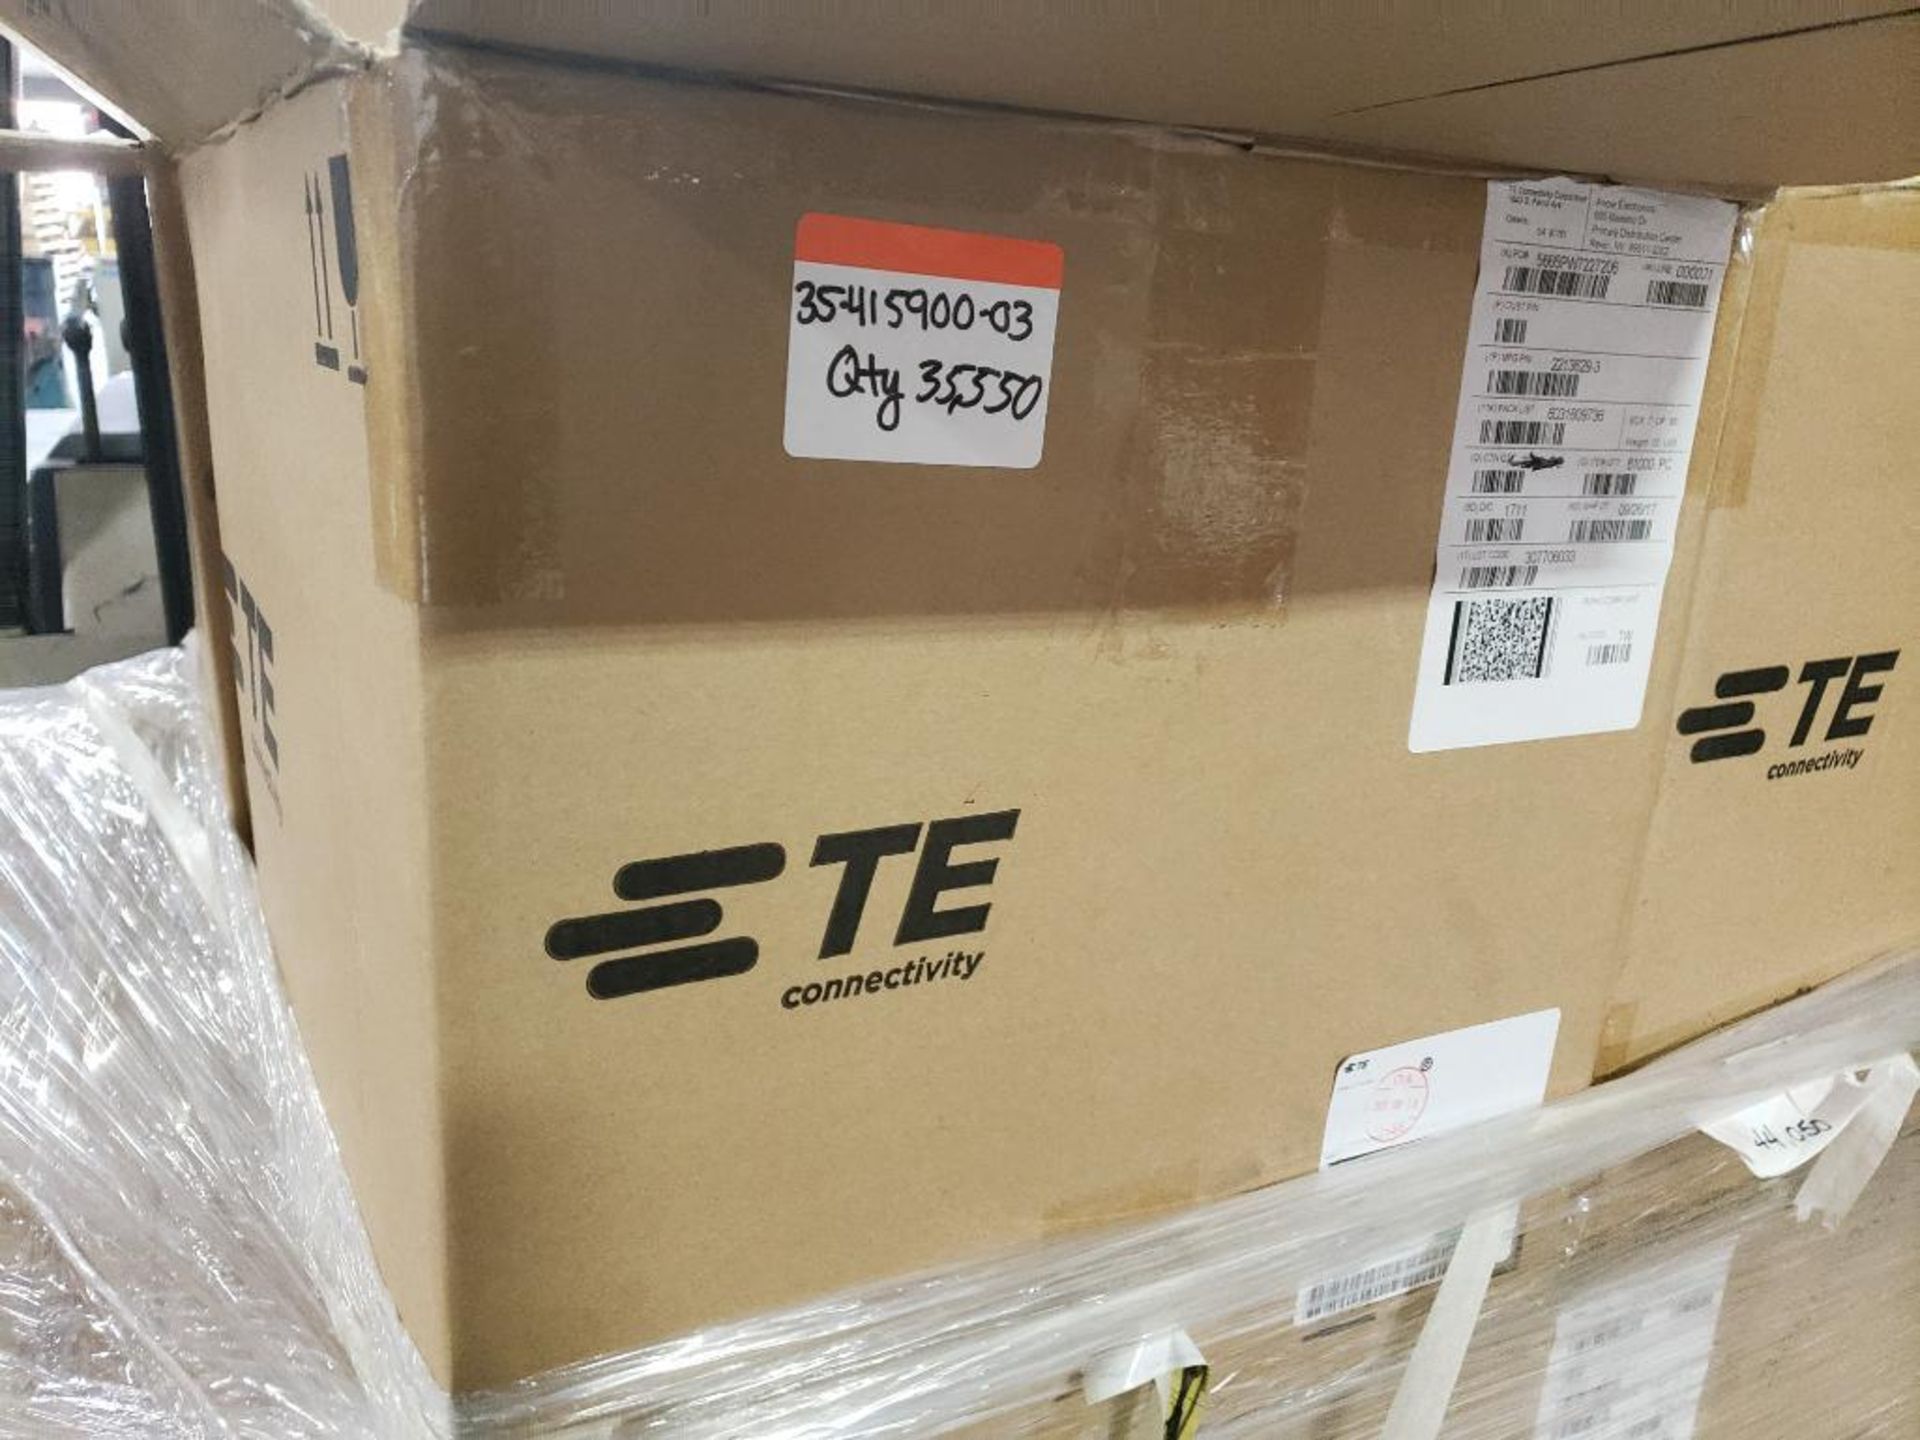 Qty 9000 - TE Connectivity part number 2213629-3. (4 bulk boxes of 9 reels) - Image 11 of 14